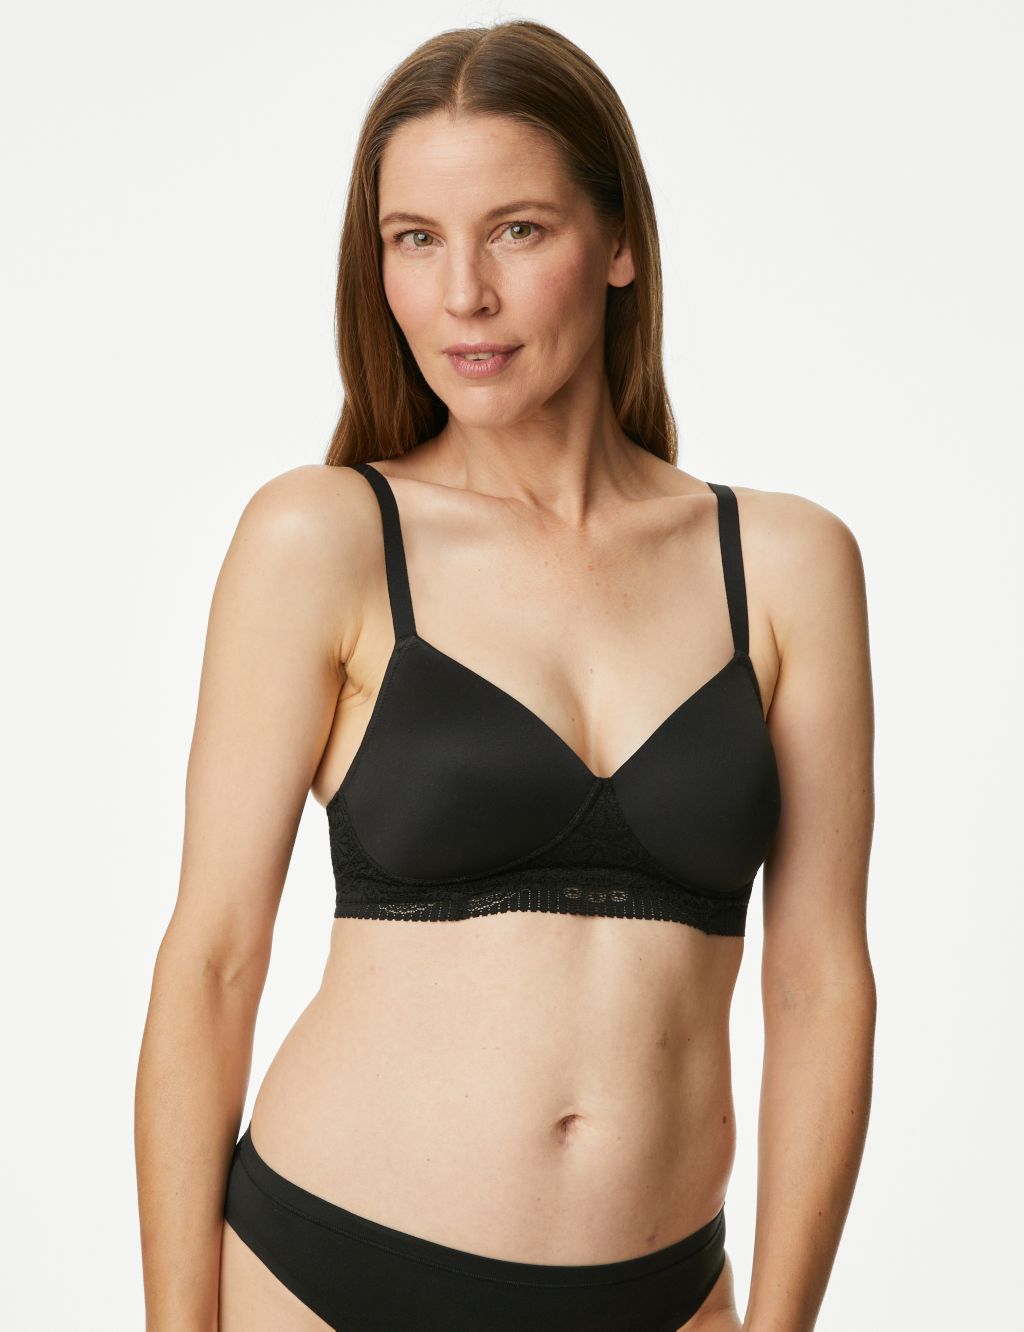 19.06% OFF on Marks & Spencer Women Non-Wired Bra Full Cup Body